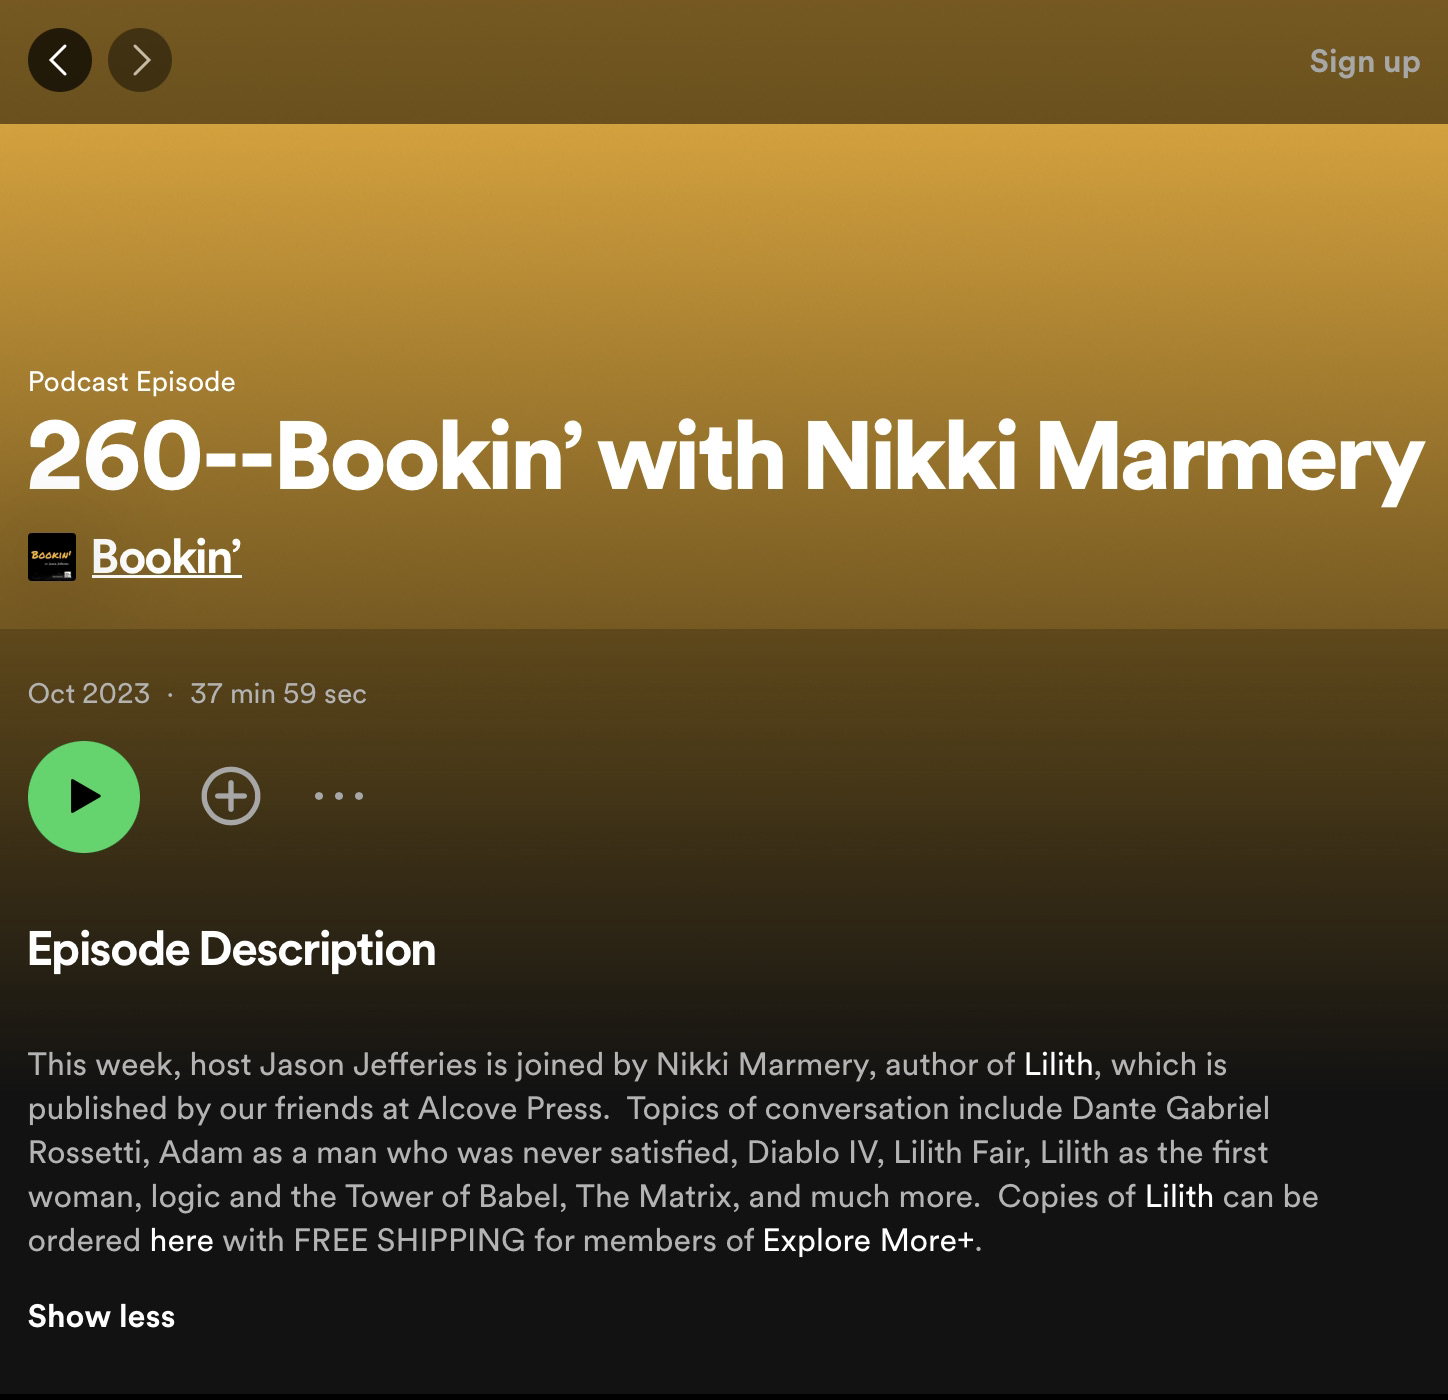 Bookin’ podcast, October 2023